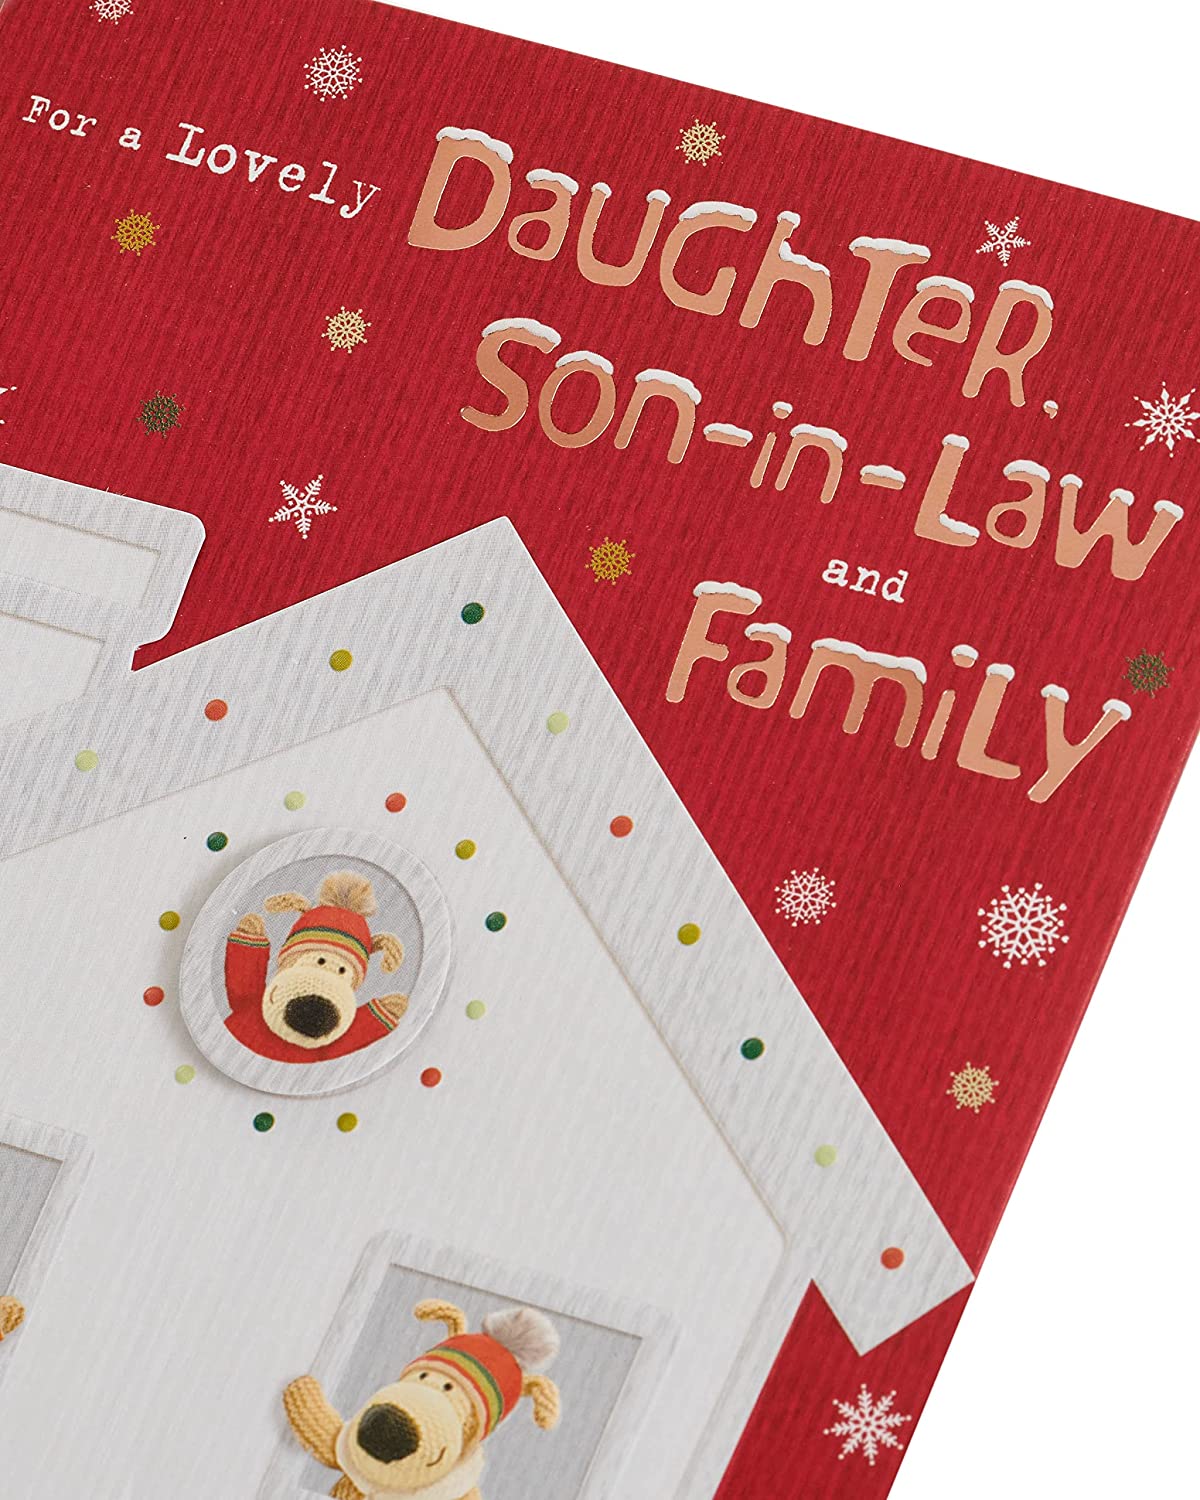 Daughter and Son In Law and Family Boofles Outside and Inside of a House Christmas Card